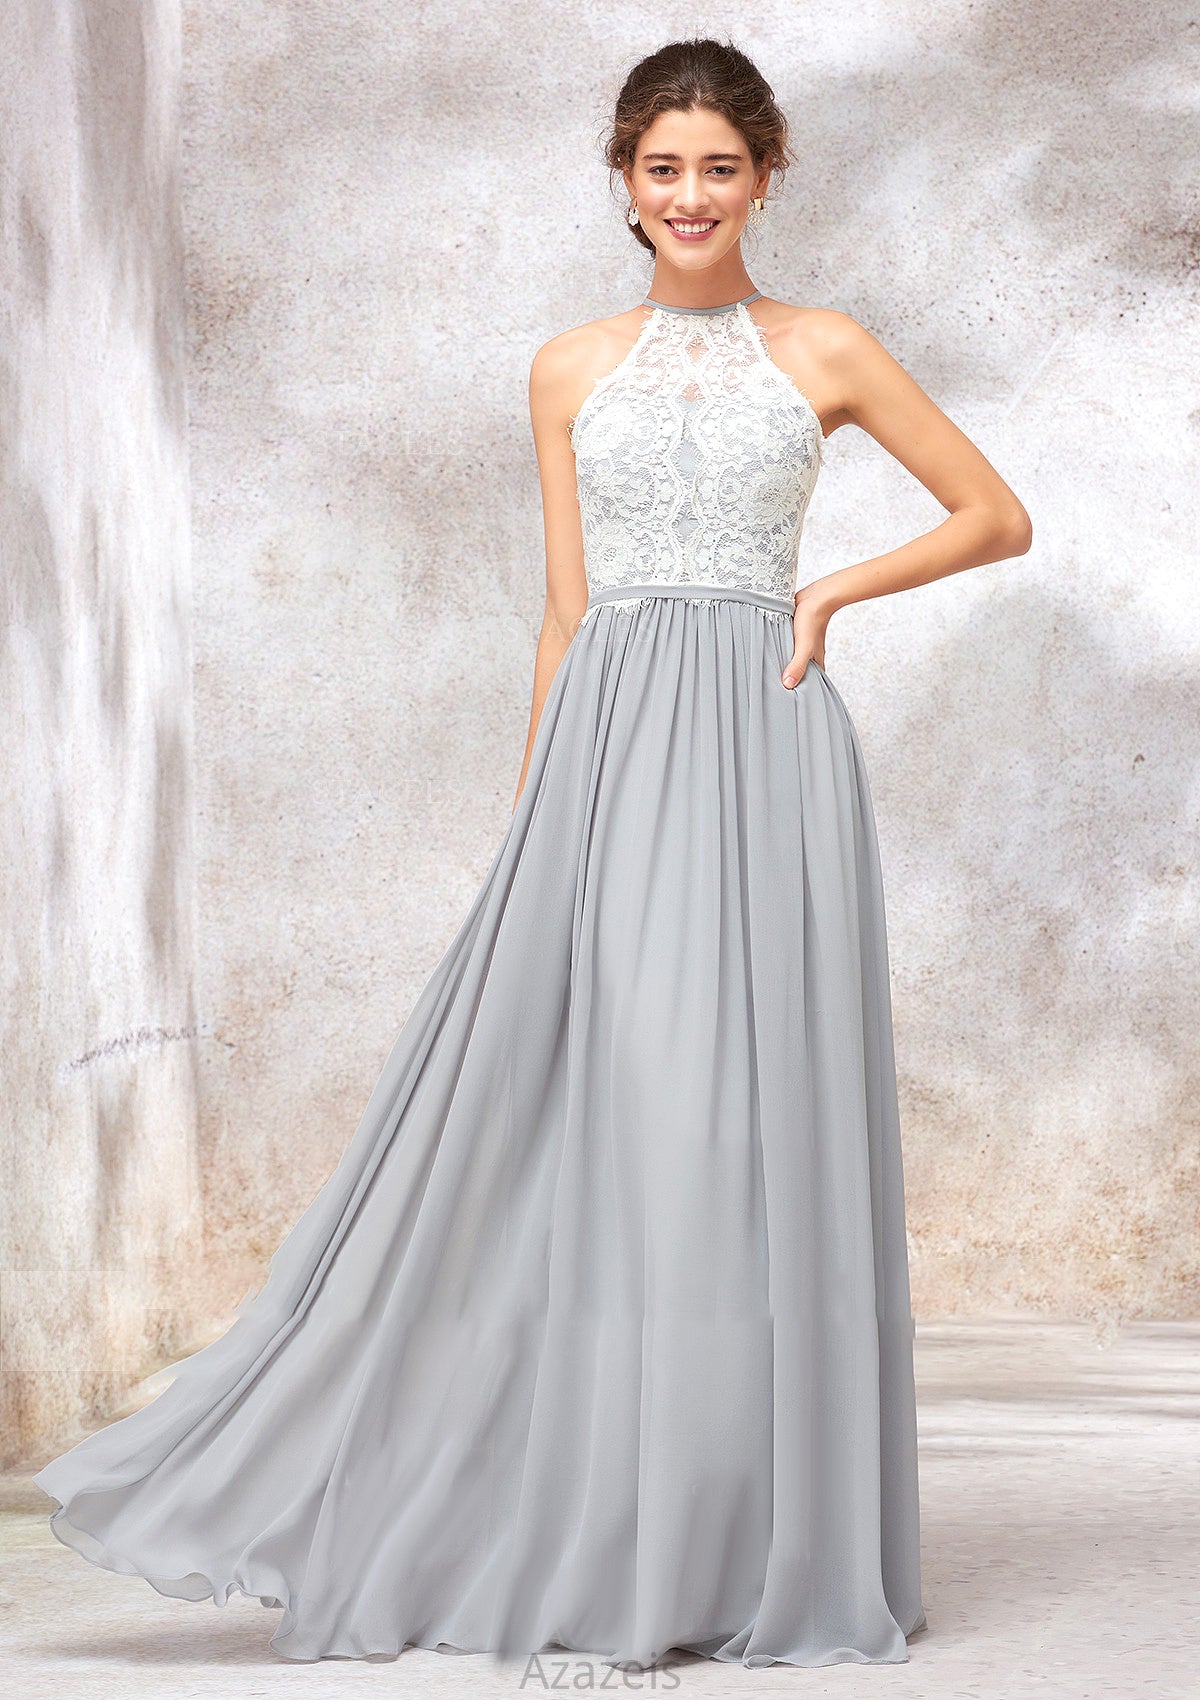 Scoop Neck A-line/Princess Sleeveless Chiffon Long/Floor-Length Bridesmaid Dresses With Lace Katelyn DFP0025350